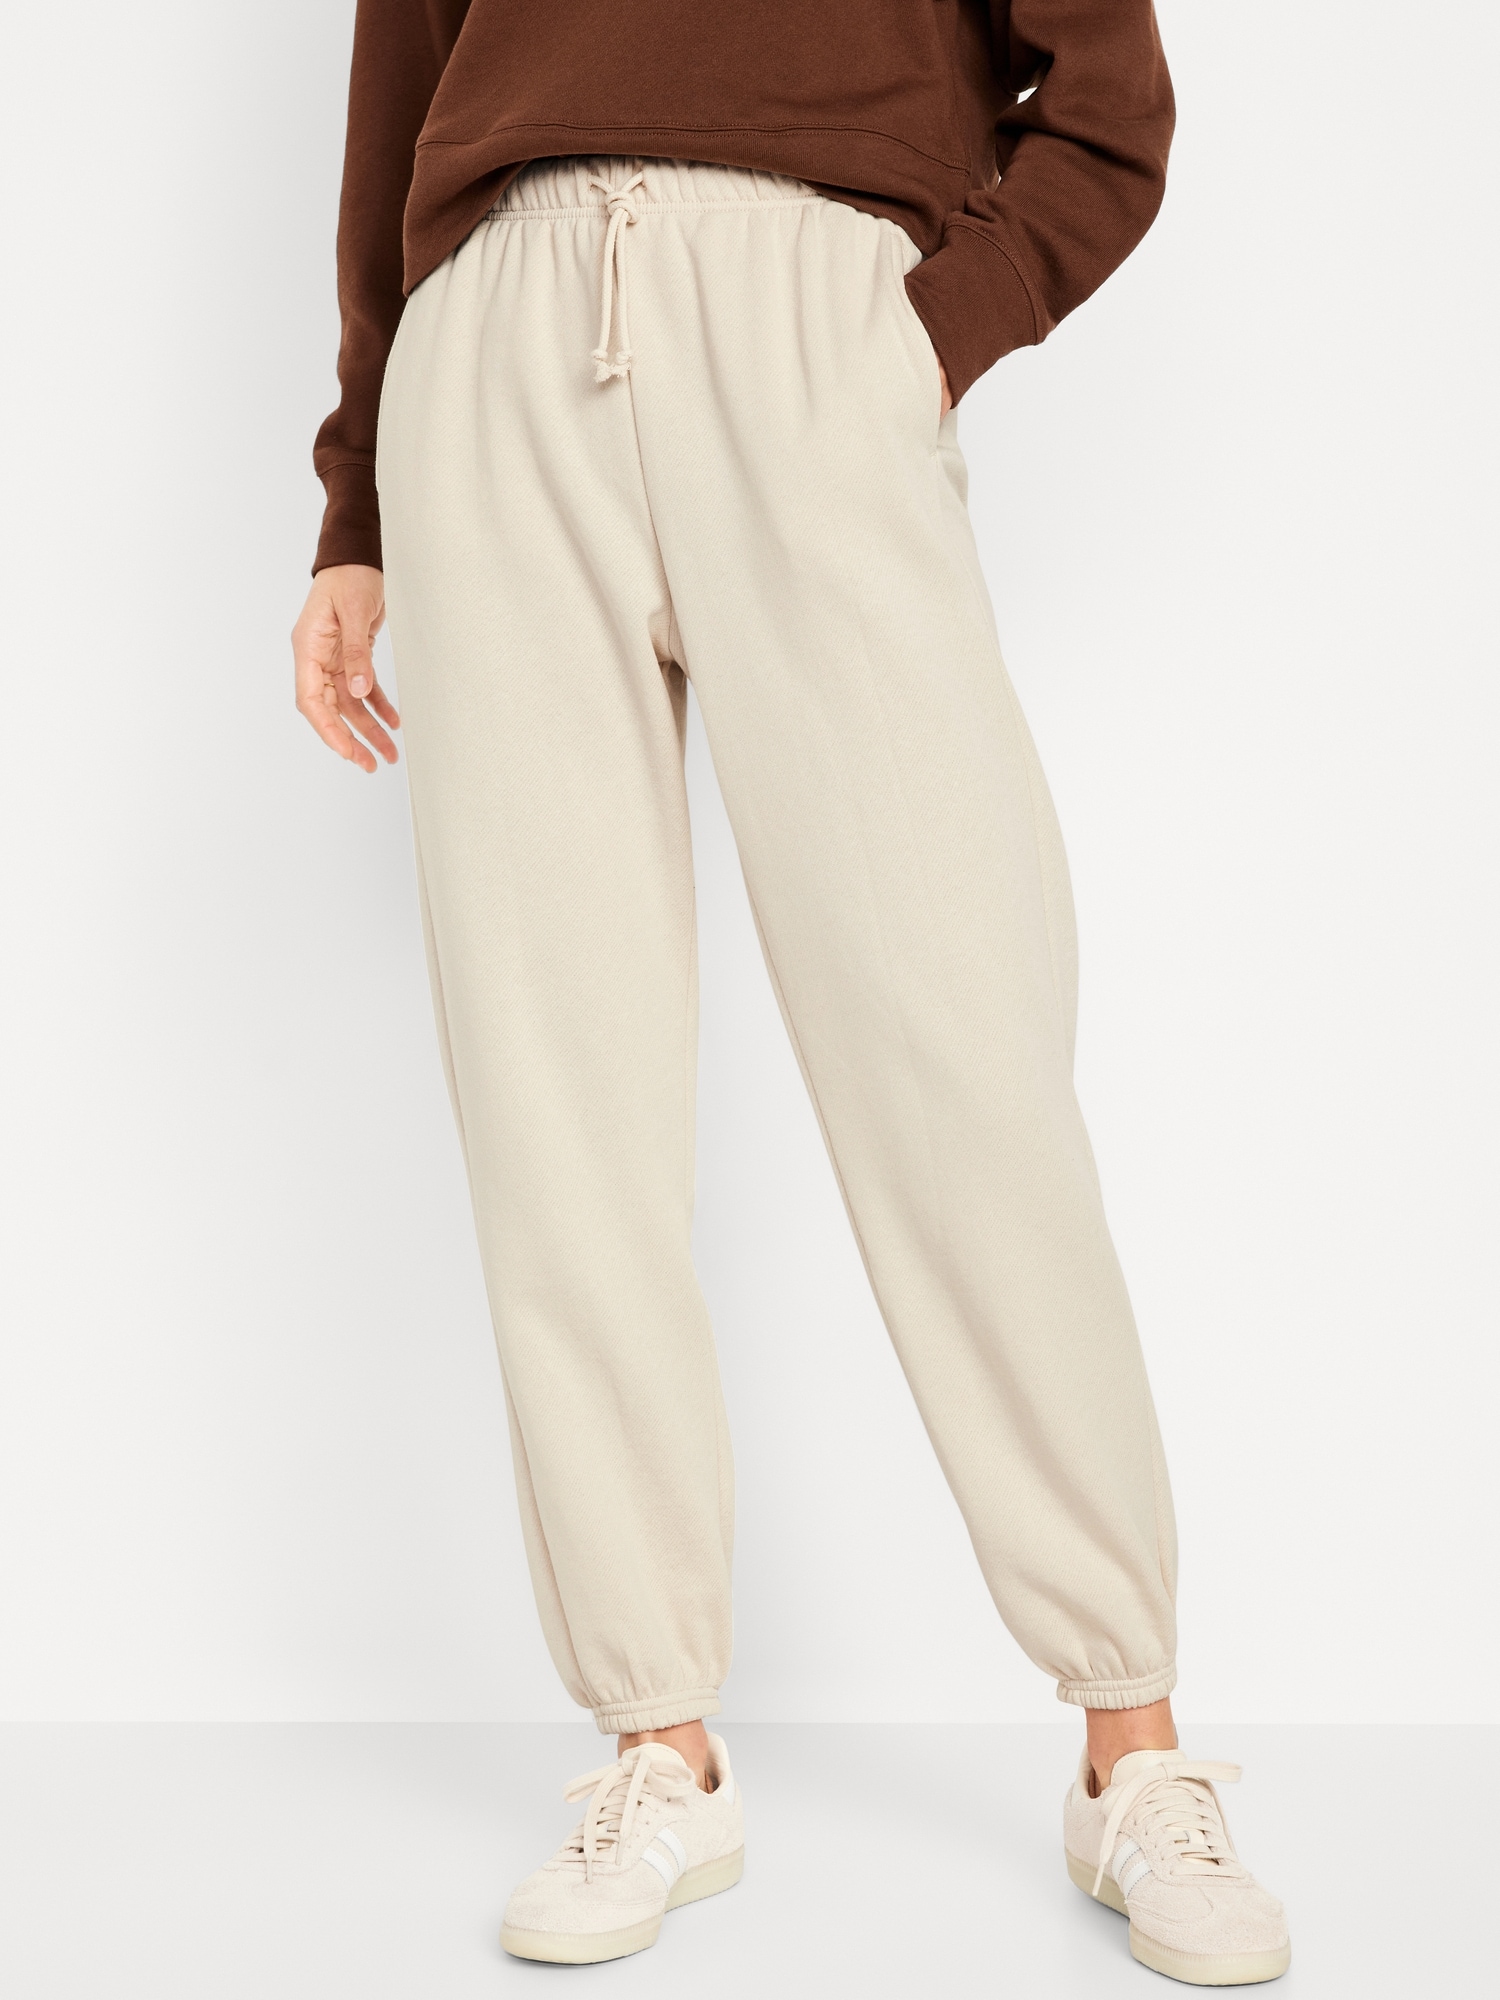 Extra High-Waisted Jogger Sweatpants for Women